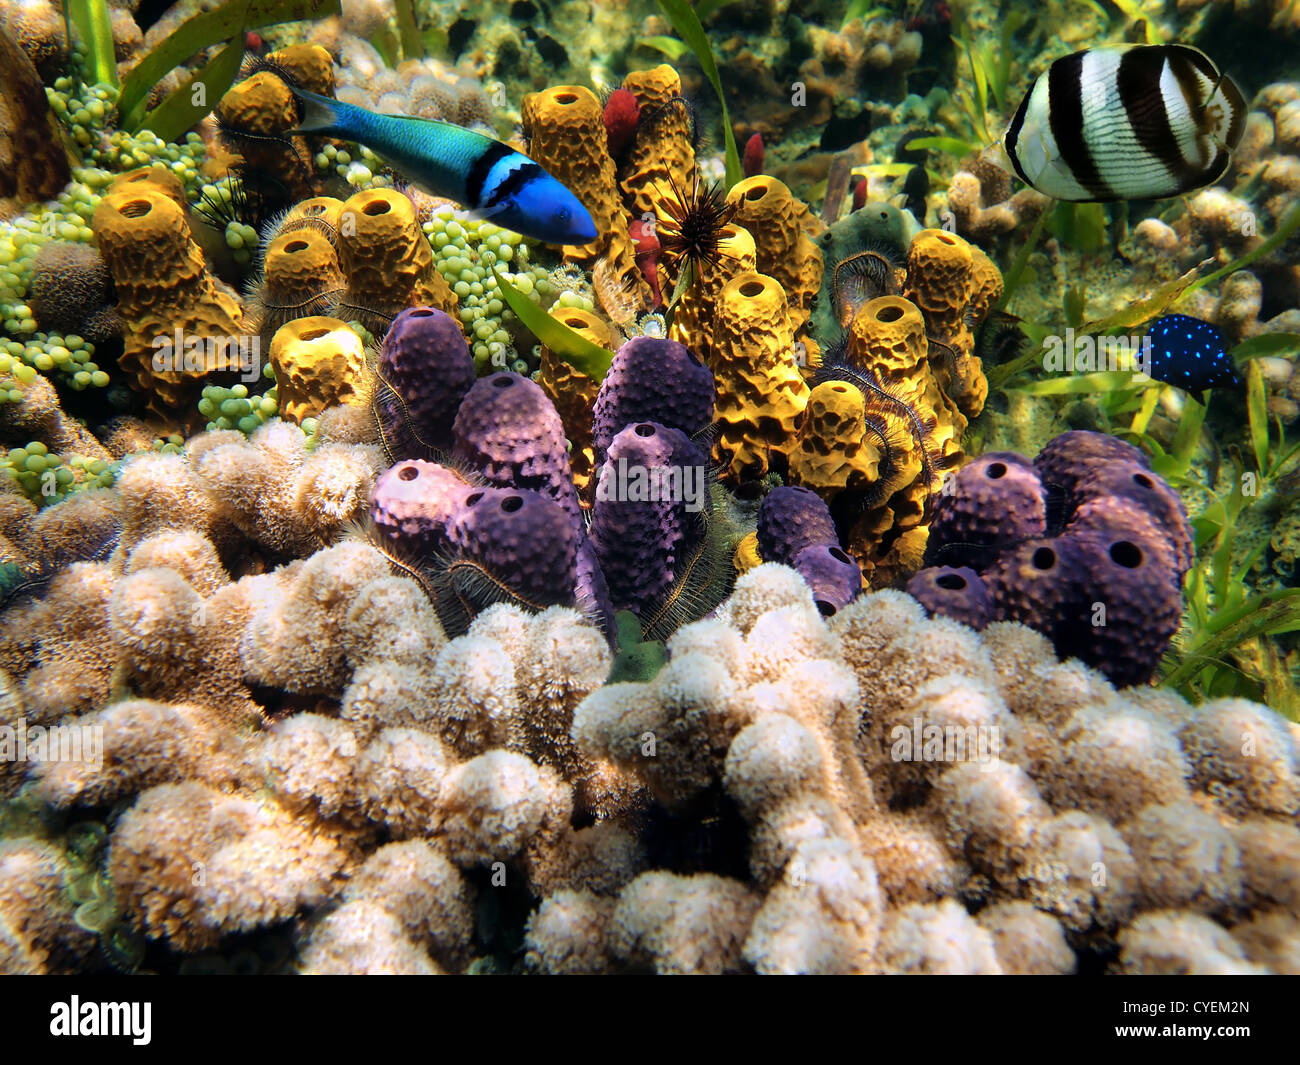 Colorful coral reef with sea-sponges and tropical fish, Caribbean sea, Bocas del Toro, Panama Stock Photo